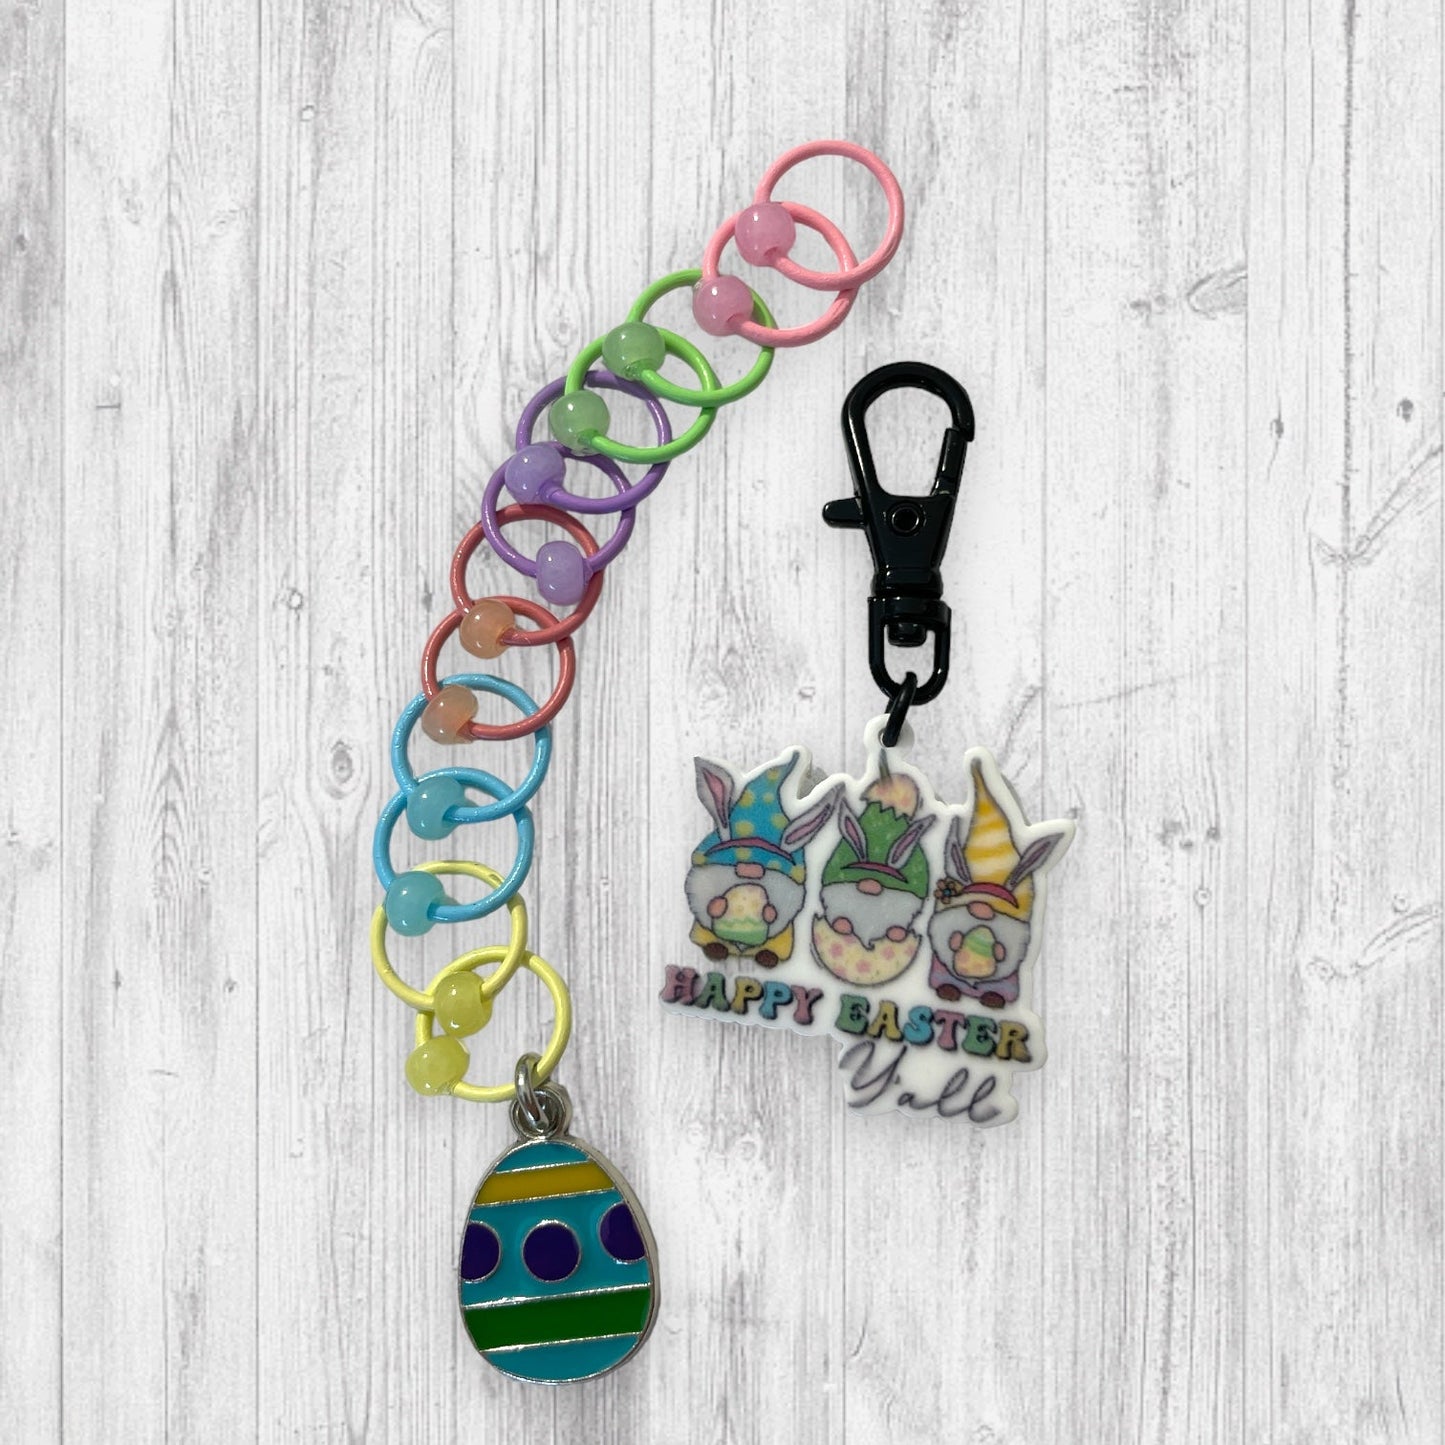 Be Hoppy Gnome Matter What Progress and Stitch Markers for Easter - AdoreKnit